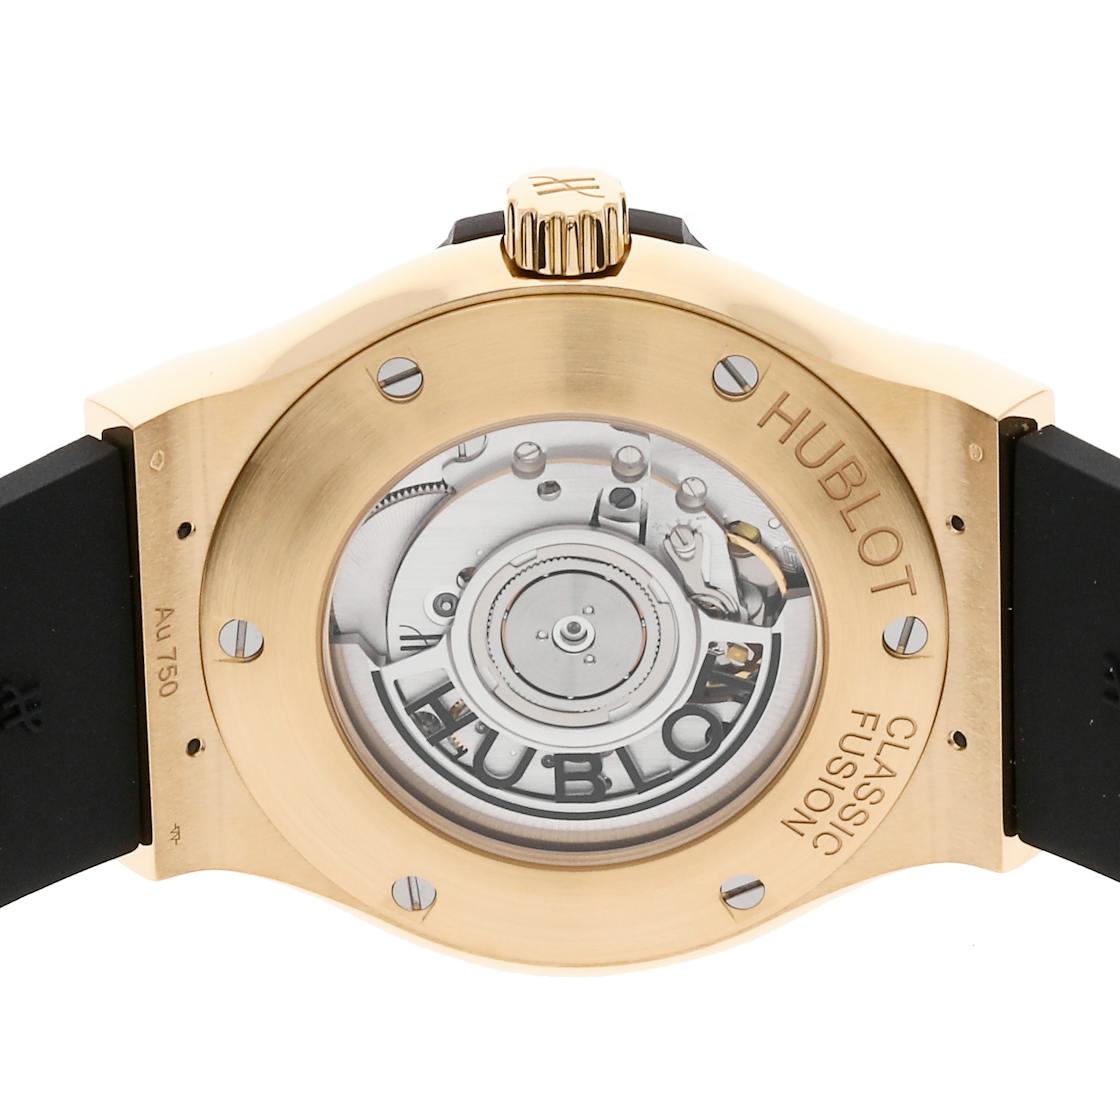 New Classic Fusion Flying B Gold Dial Automatic Mechanical Magneto Watch  Jupiter With Rose Gold Case And Borwn Leather Strap Affordable Sport Watch  From Pure_time, $77.73